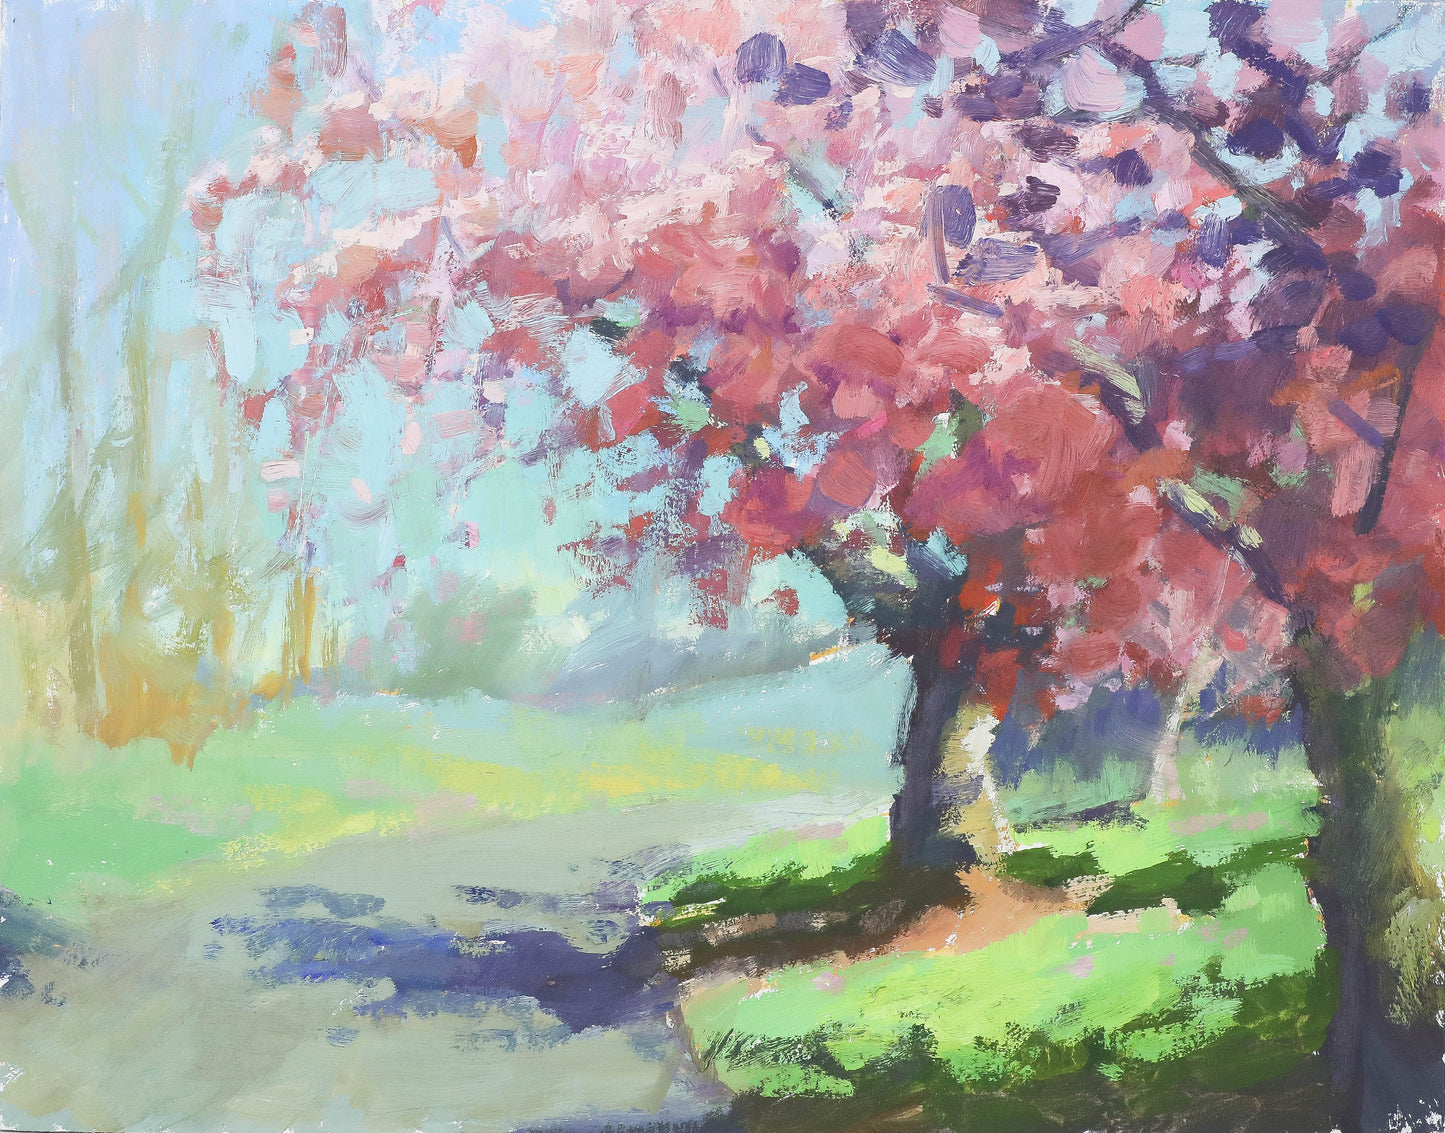 "Spring on Mt. Tabor", 11x14 Original Oil Painting by Artist Kristina Sellers